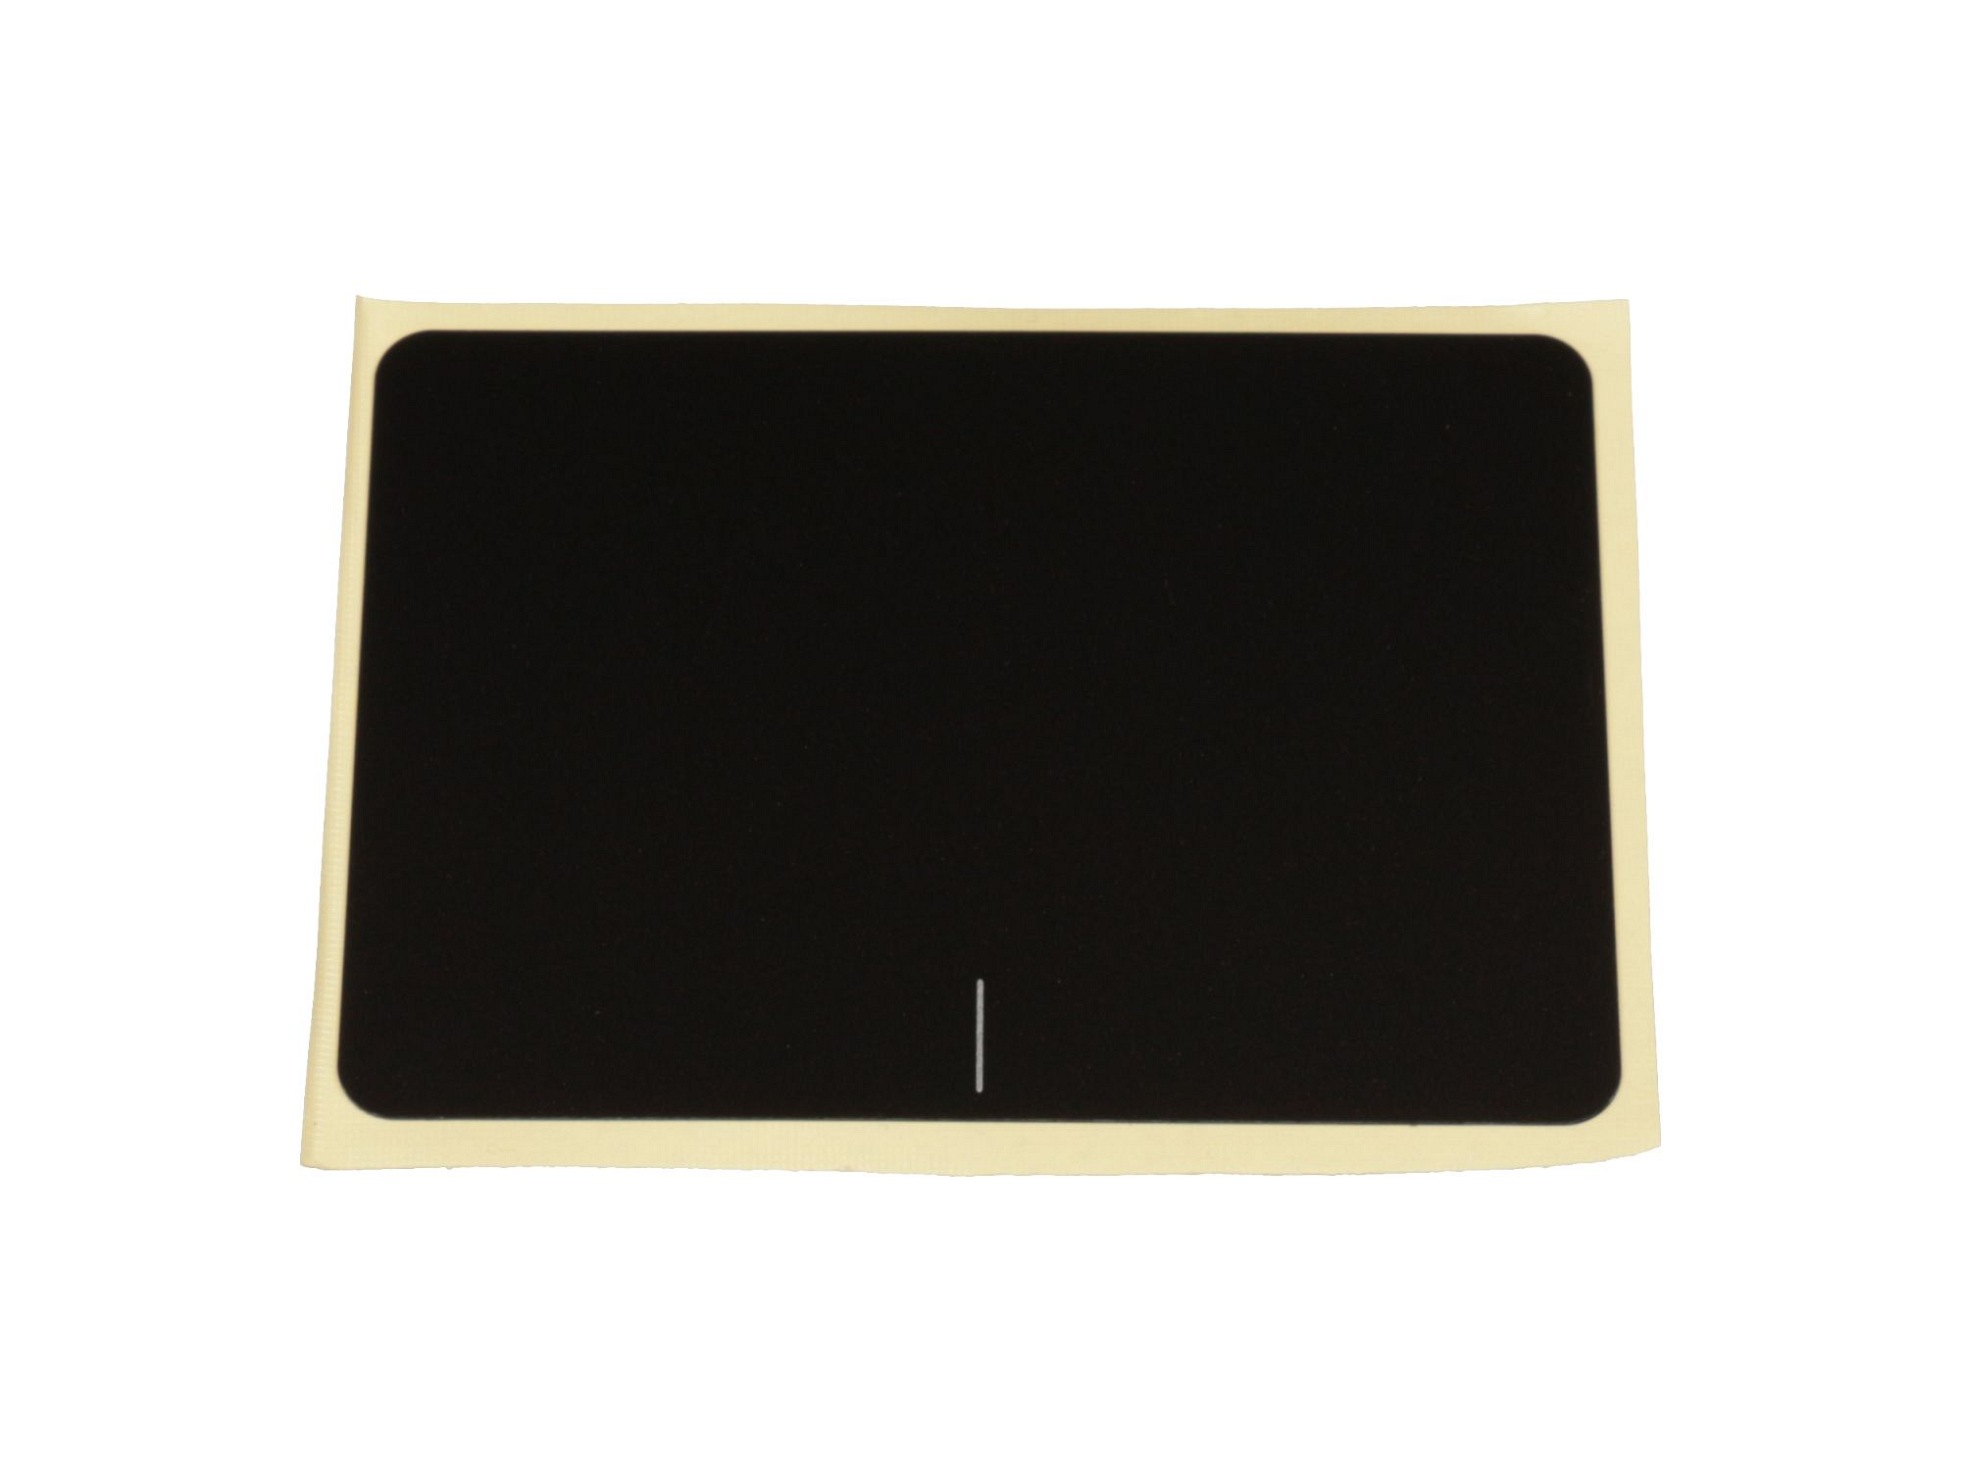 Touchpad-Cover für Asus X756UJ